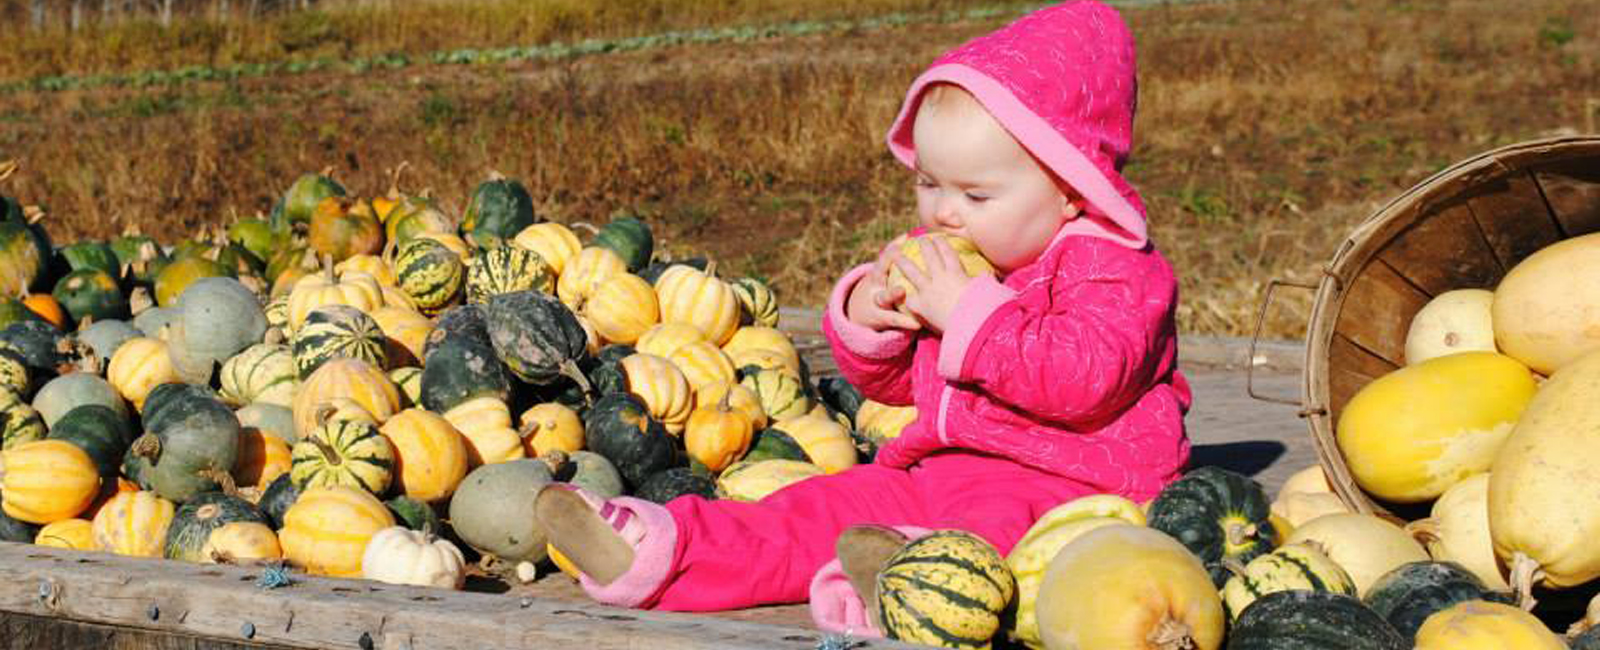 In the fall, Mark and Deanna Jones keep a large supply of pumpkins.